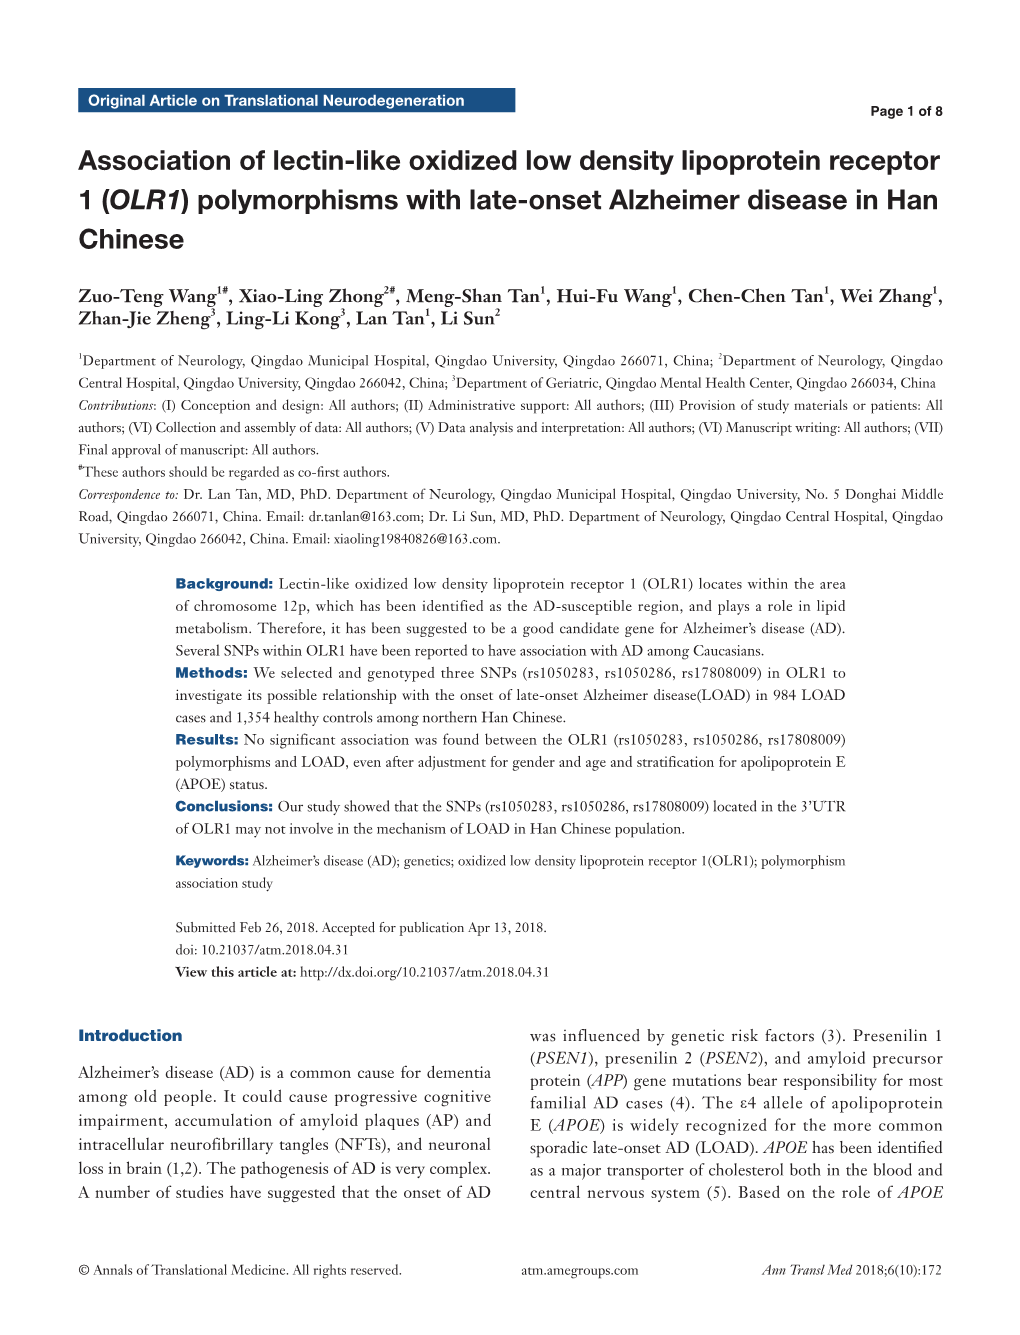 Polymorphisms with Late-Onset Alzheimer Disease in Han Chinese